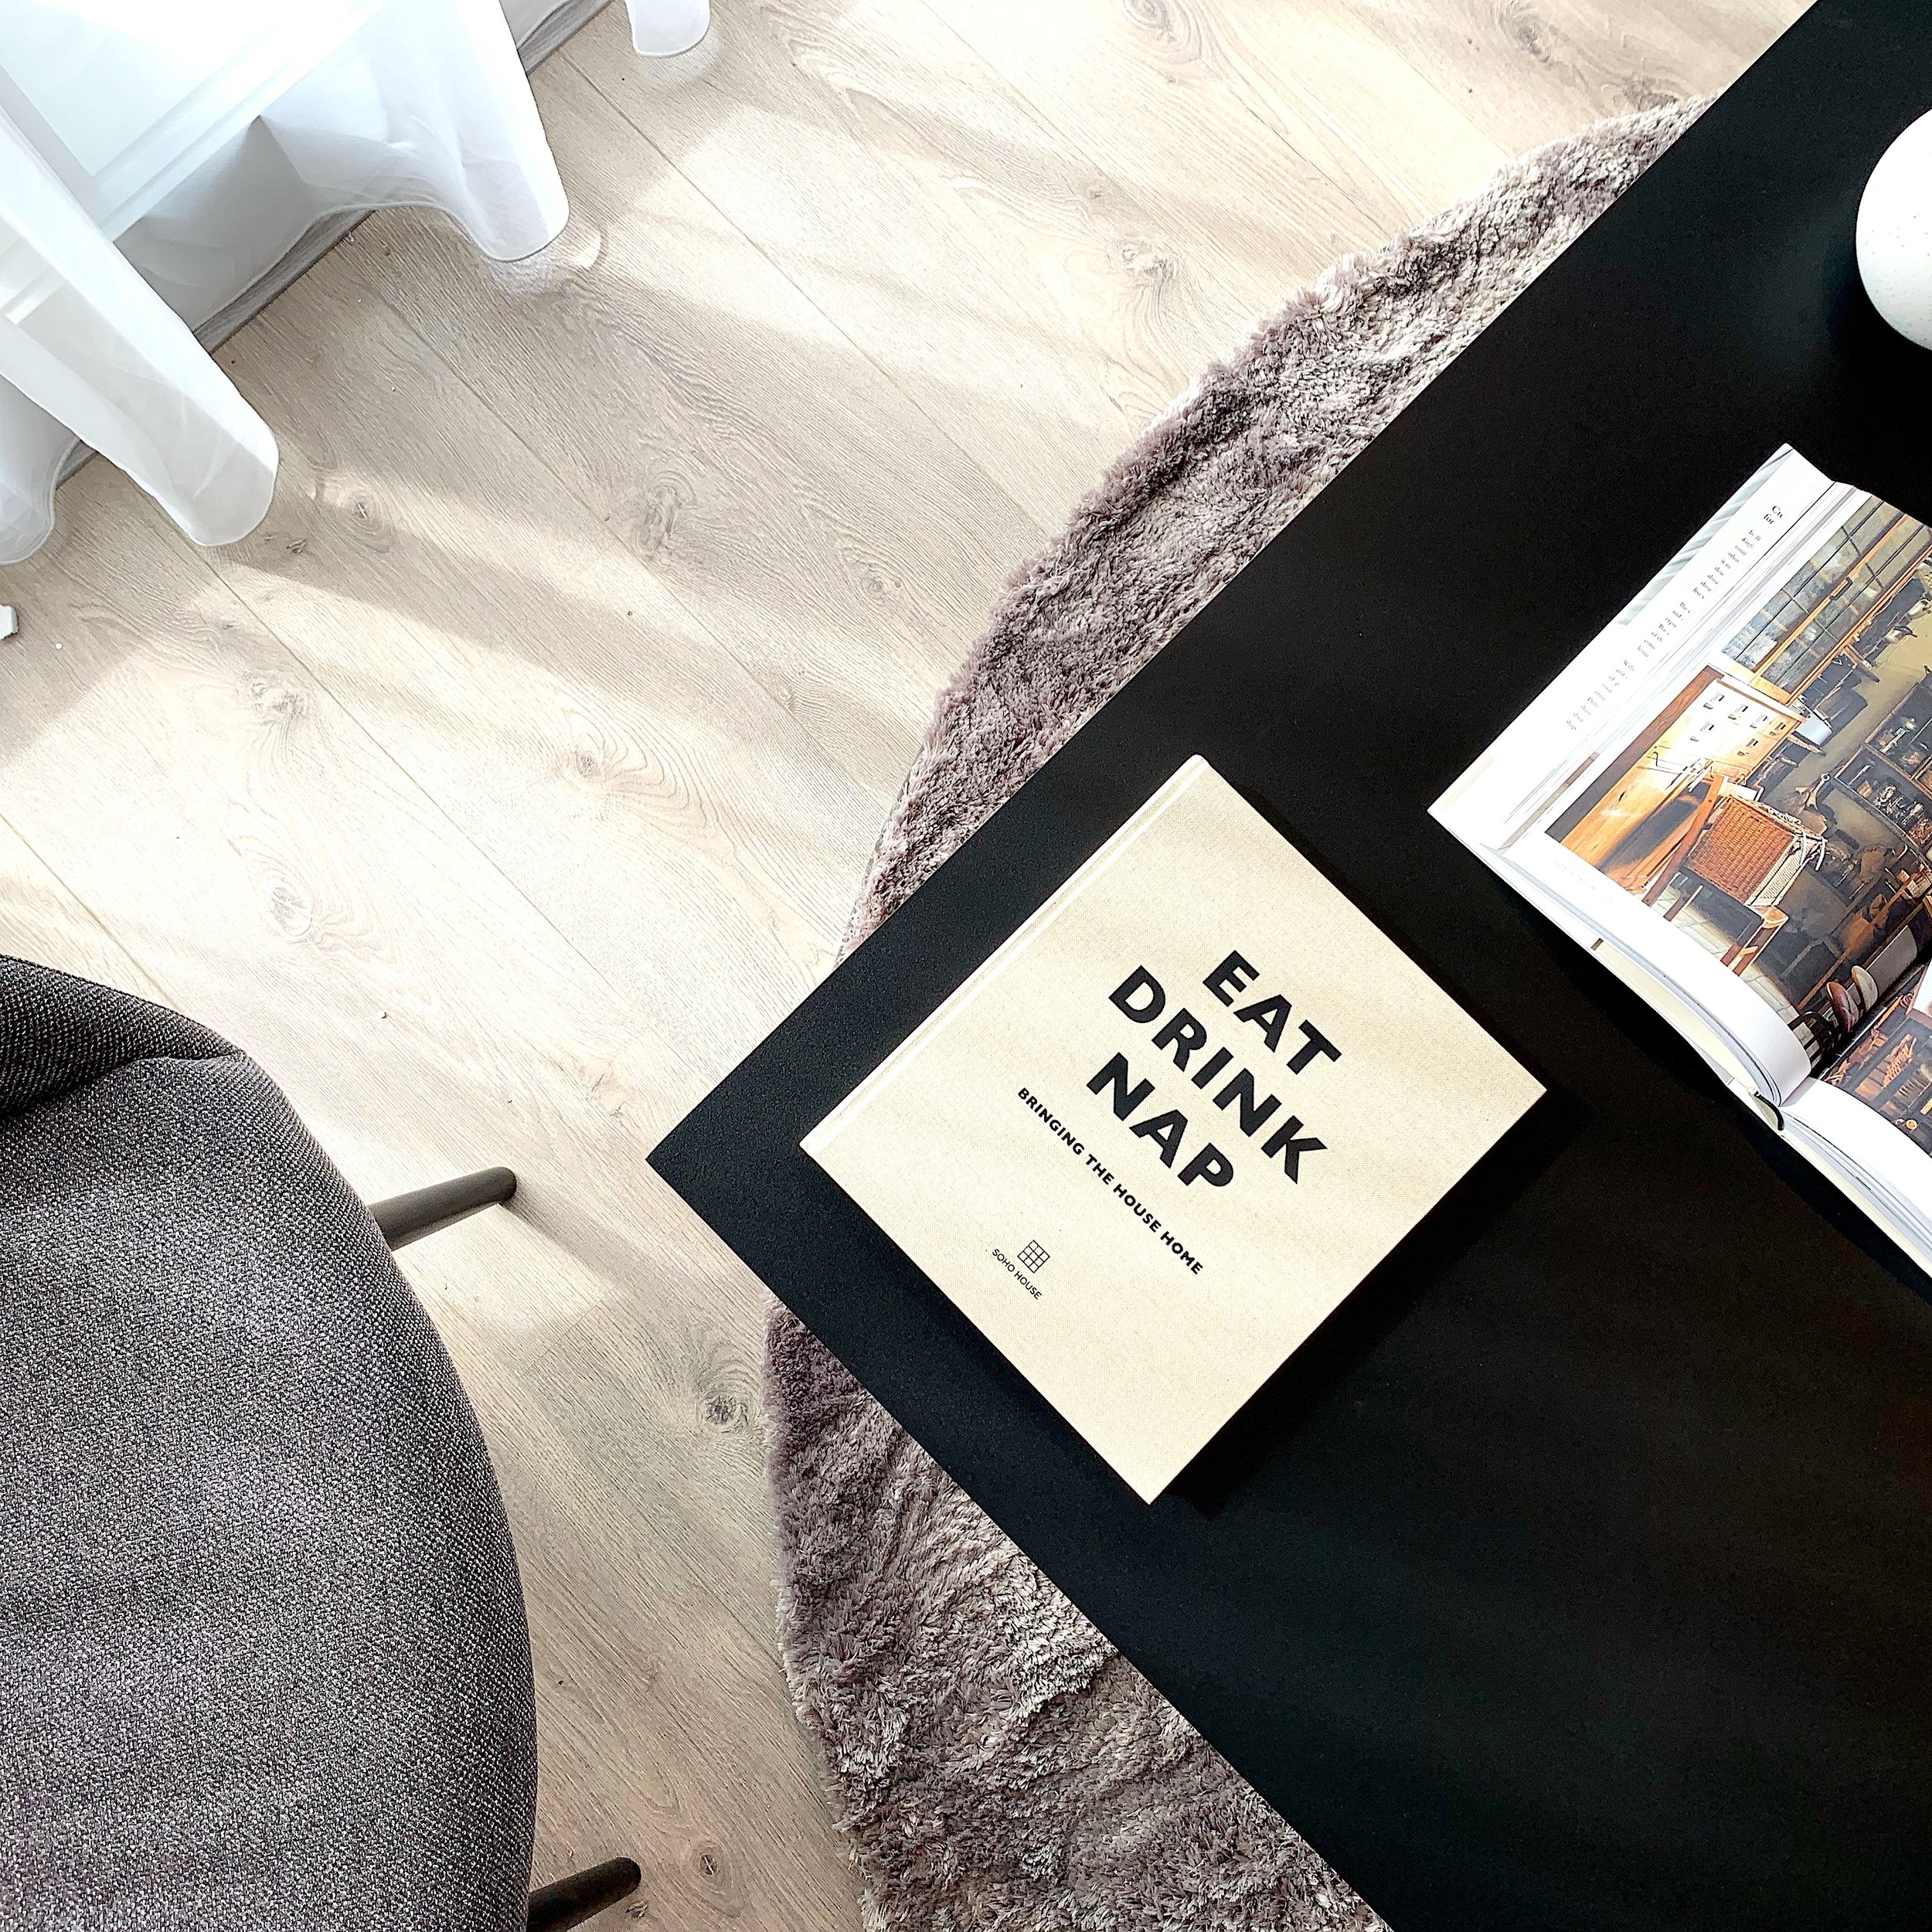 Hanover court with park developments. black coffee table with white books